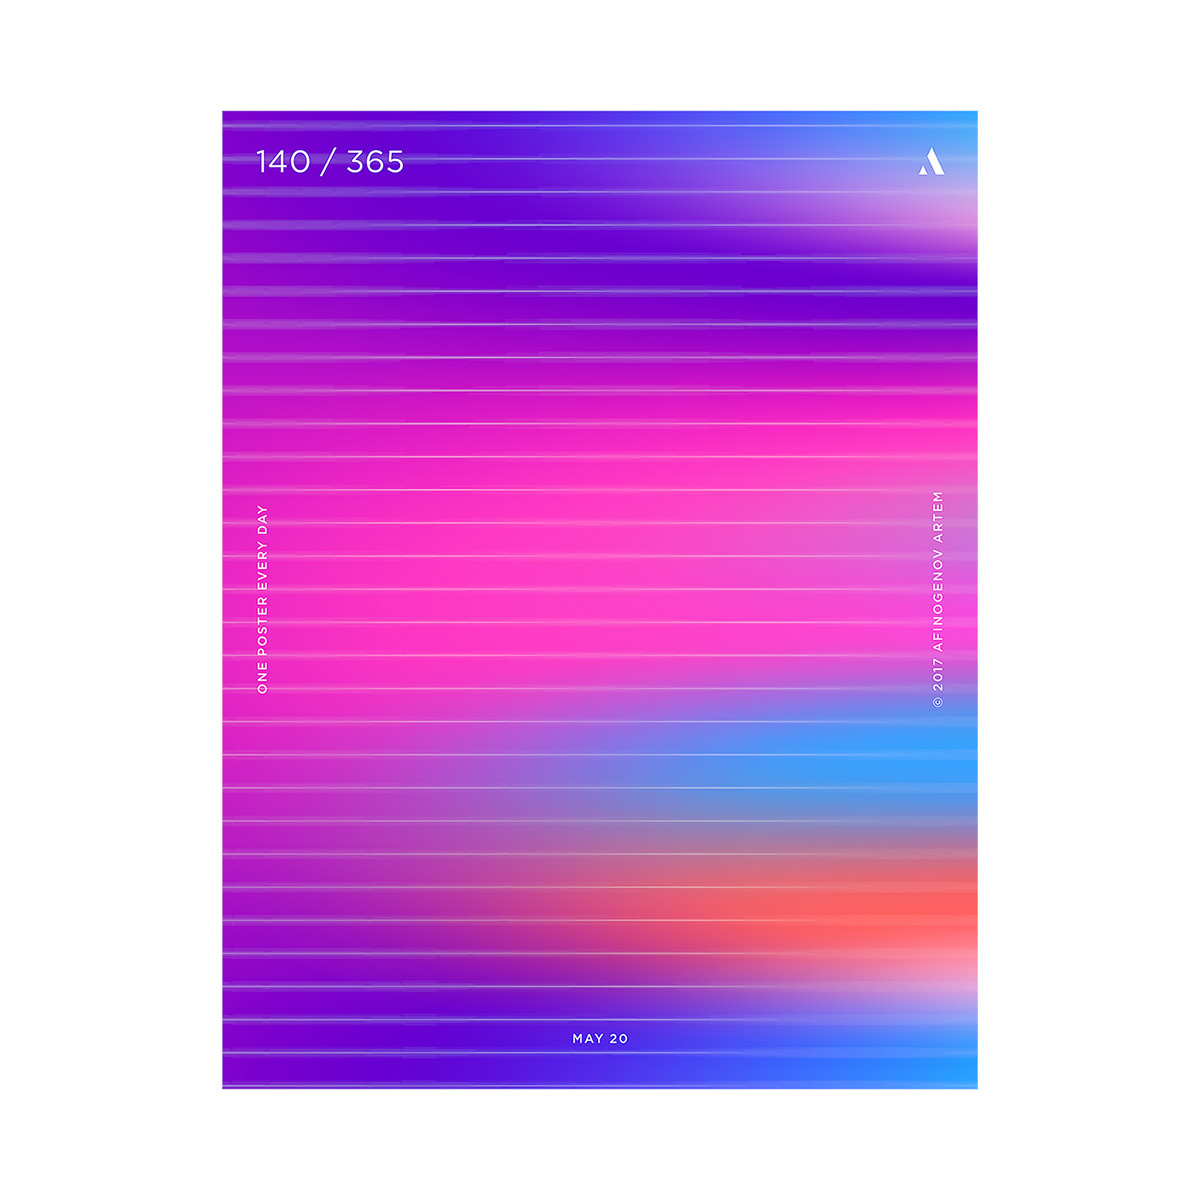 challenge poster every day colorfull best gradients inspire tips design inspiration posters Creative Works create poster